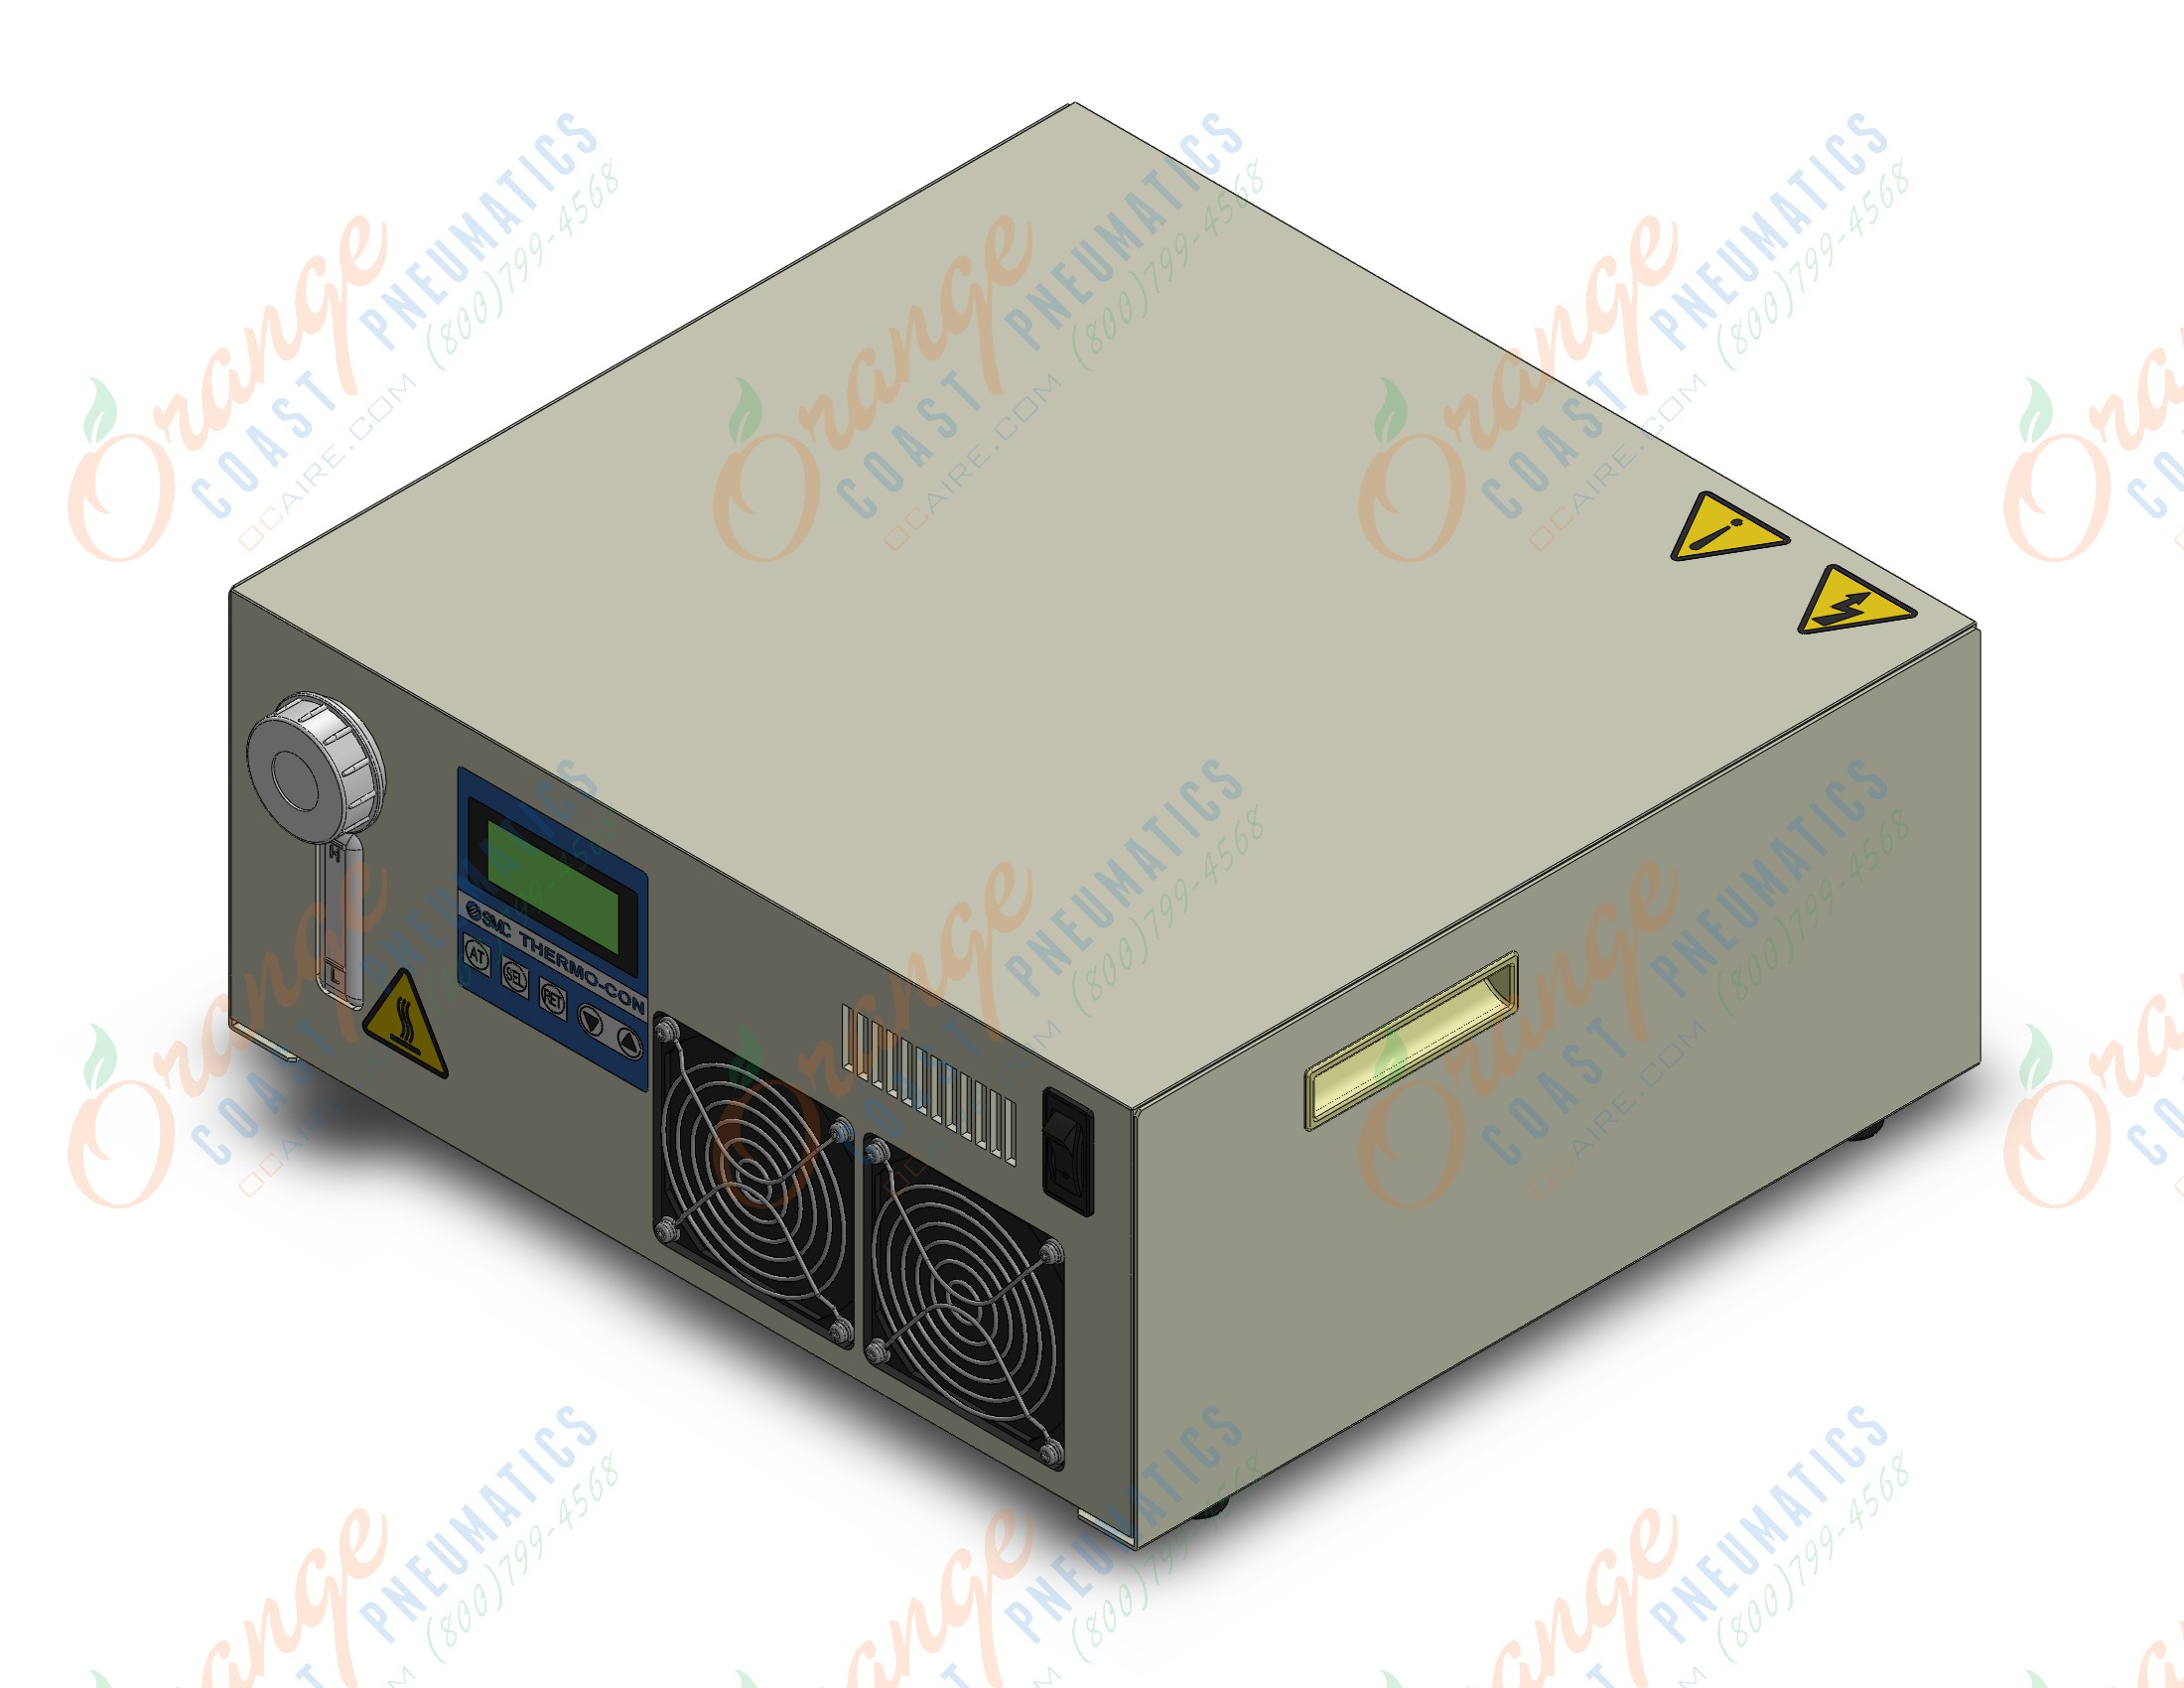 SMC HECR006-A5N-E thermo, rack mount, HRG - INDUSTRIAL CHILLER